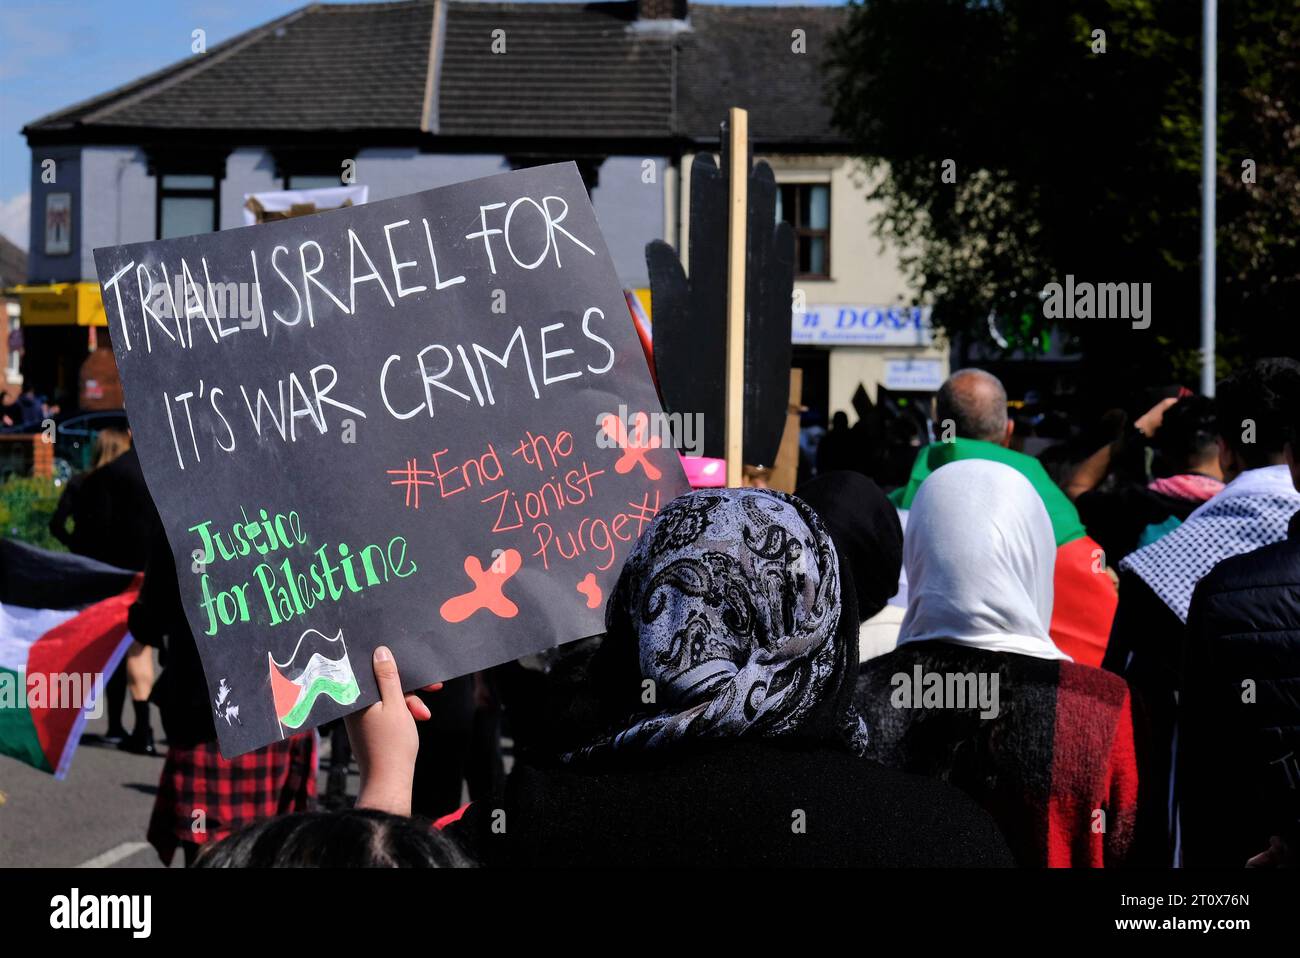 Hanley Park, Stoke on Trent, UK. 29th May 2021. Protesters march in Stoke on Trent demanding Freedom for Palestine and the end of oppression. Stock Photo